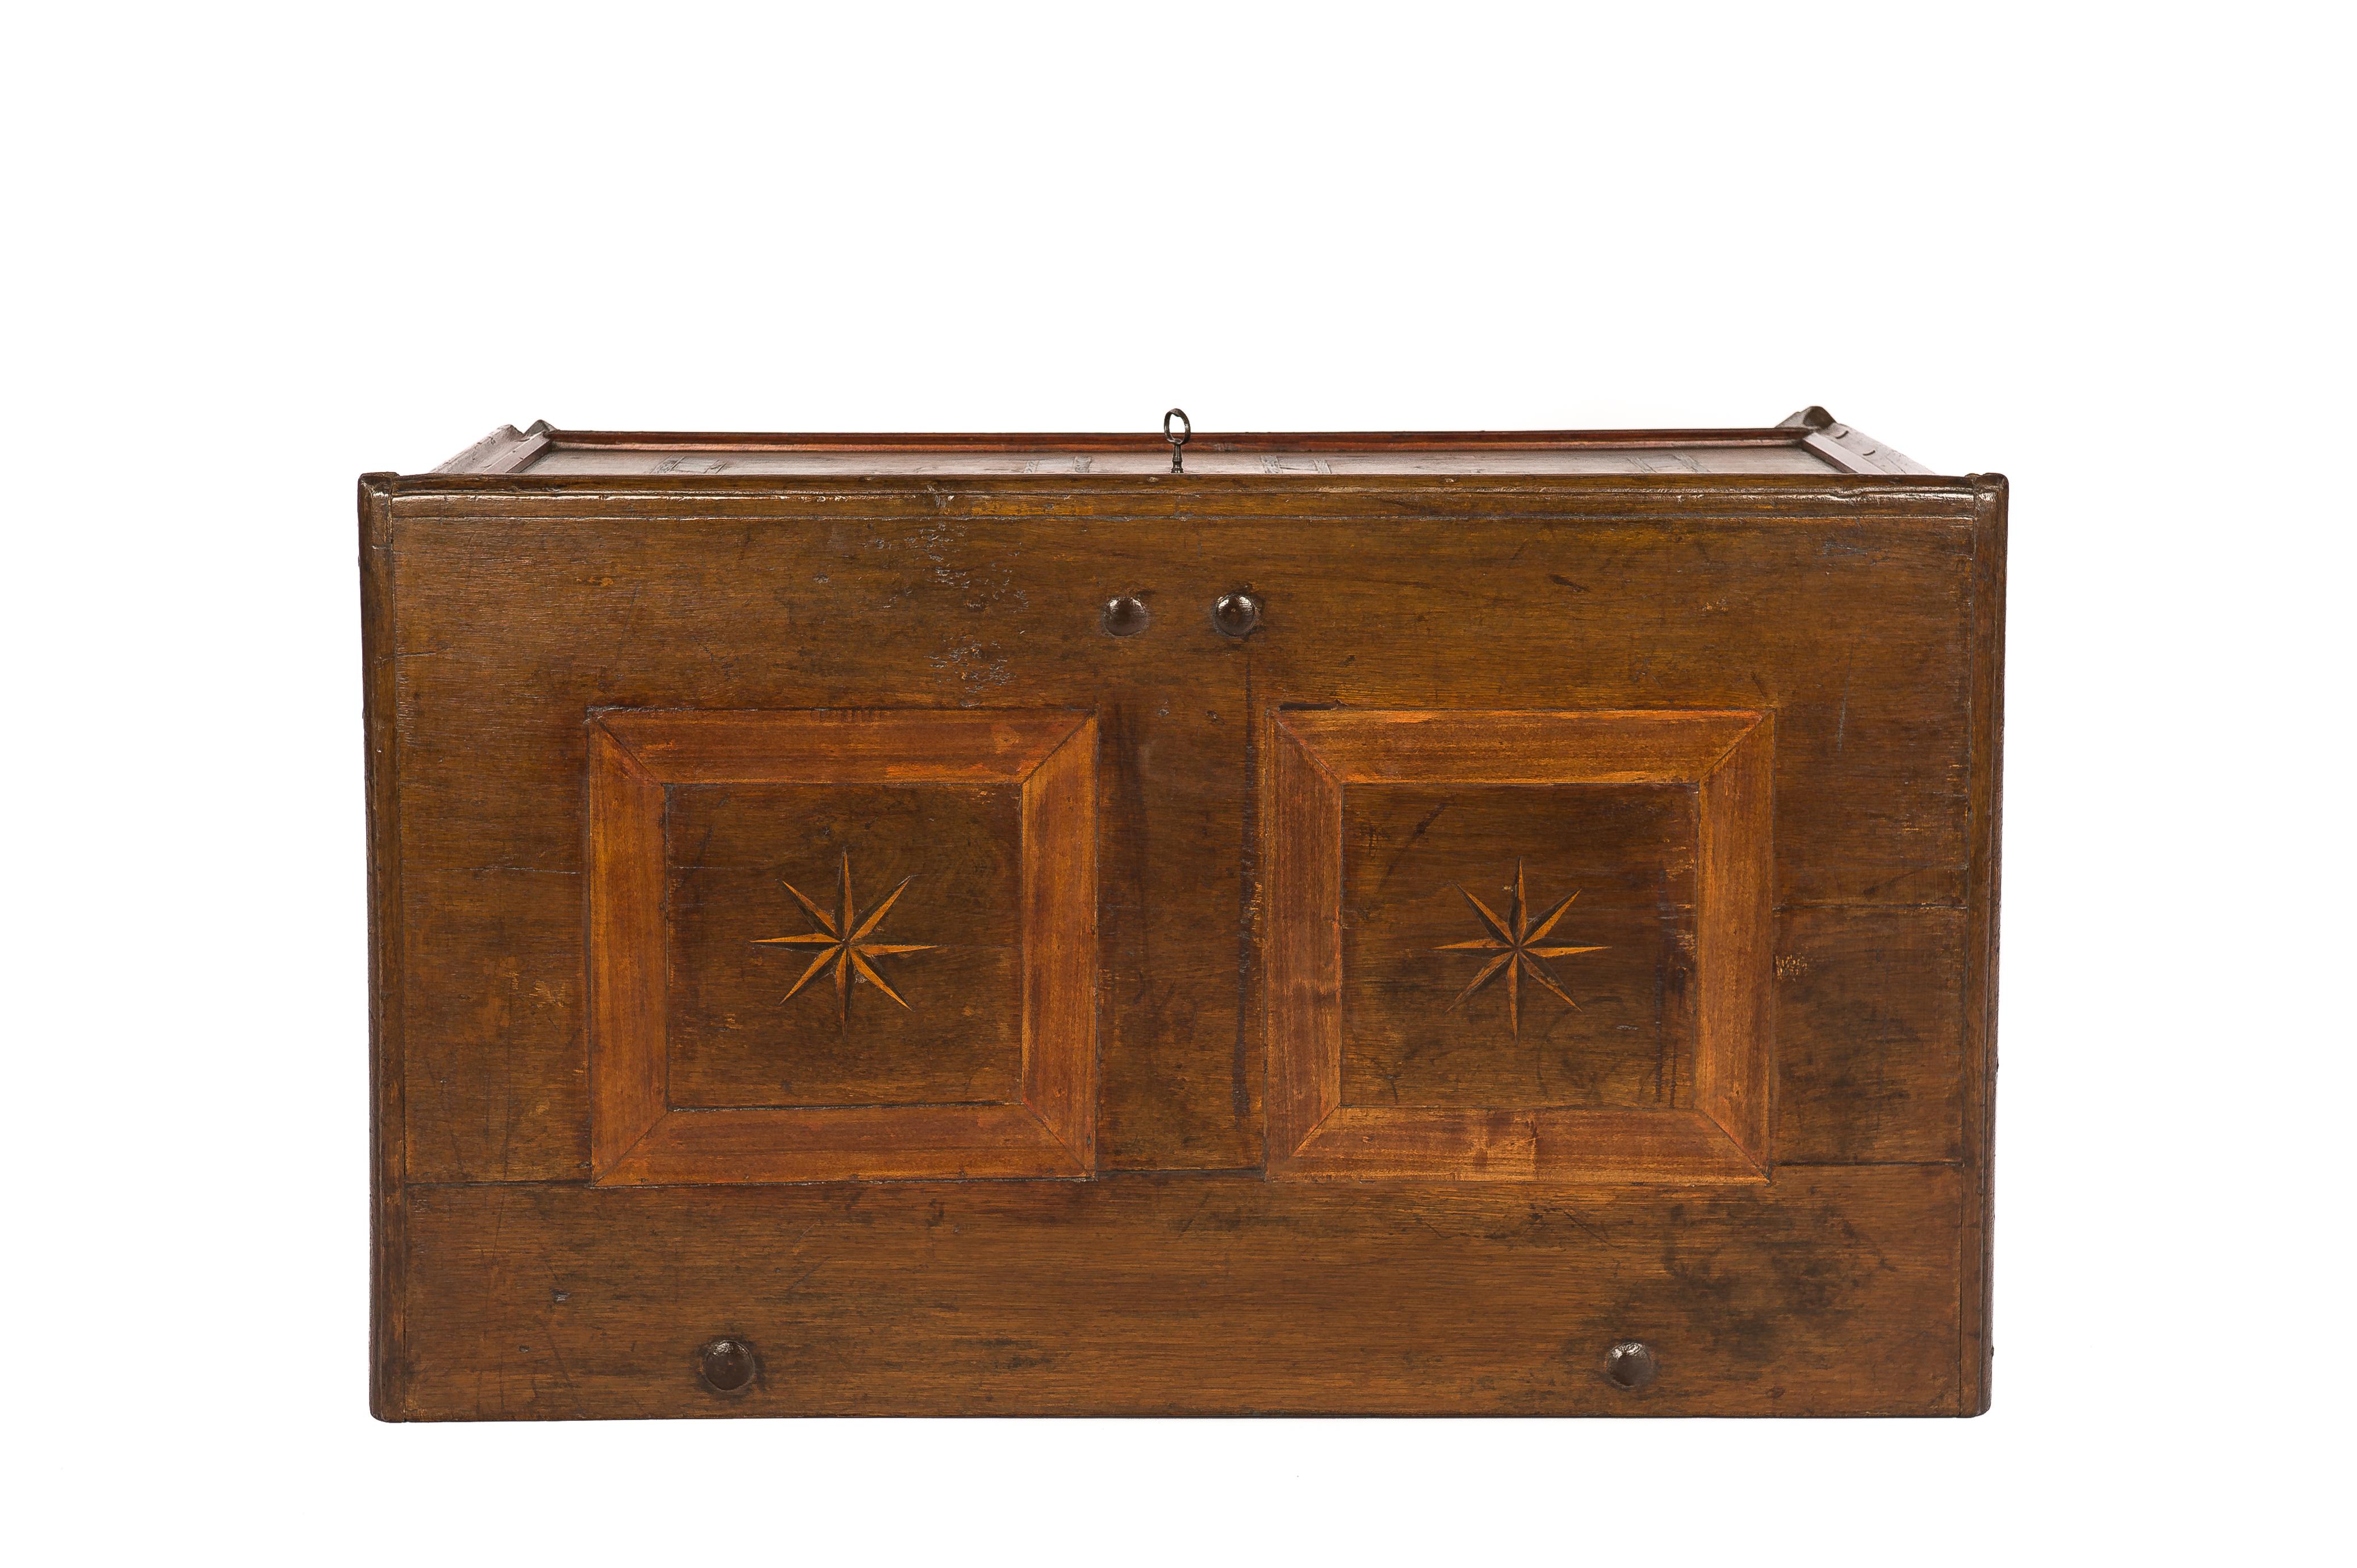 Steel Antique Late 18th-Century German Oak and Fruitwood Marquetry Trunk or Chest For Sale